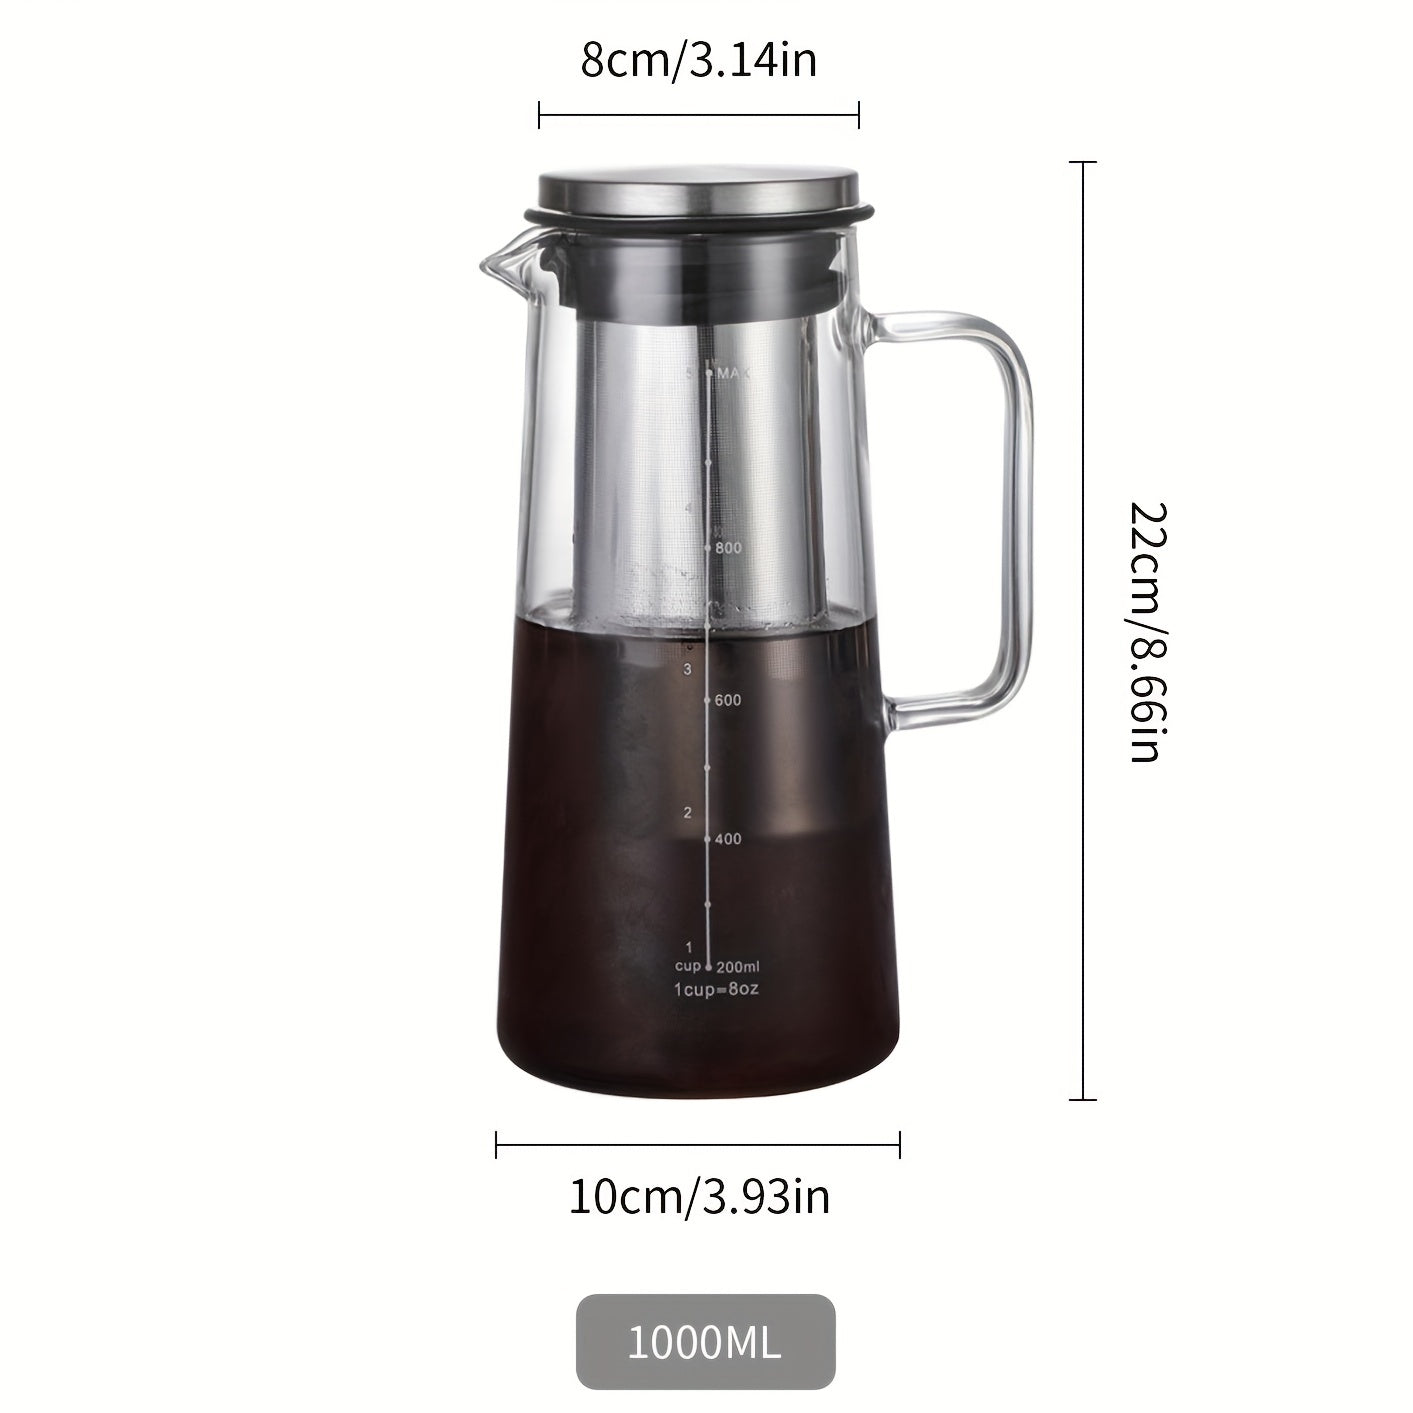 34oz Cold Brew Coffee/Iced Tea Maker with 1.0L Glass Carafe, Stainless Steel Filter